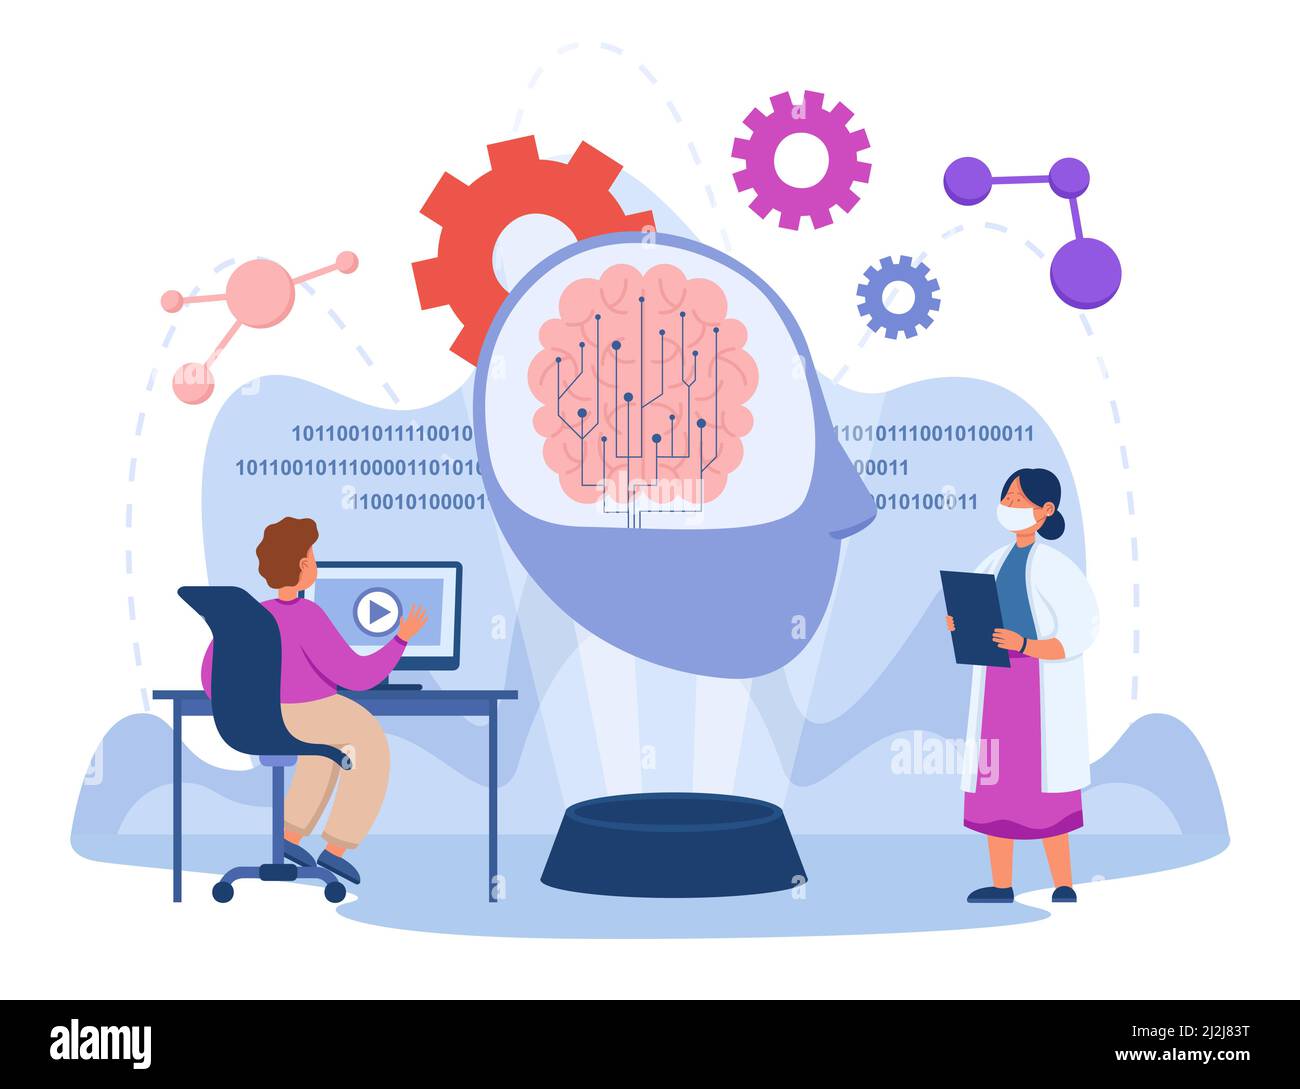 Tiny scientists developing AI using machine learning. Brain computing data flat vector illustration. Artificial intelligence, technology, science conc Stock Vector